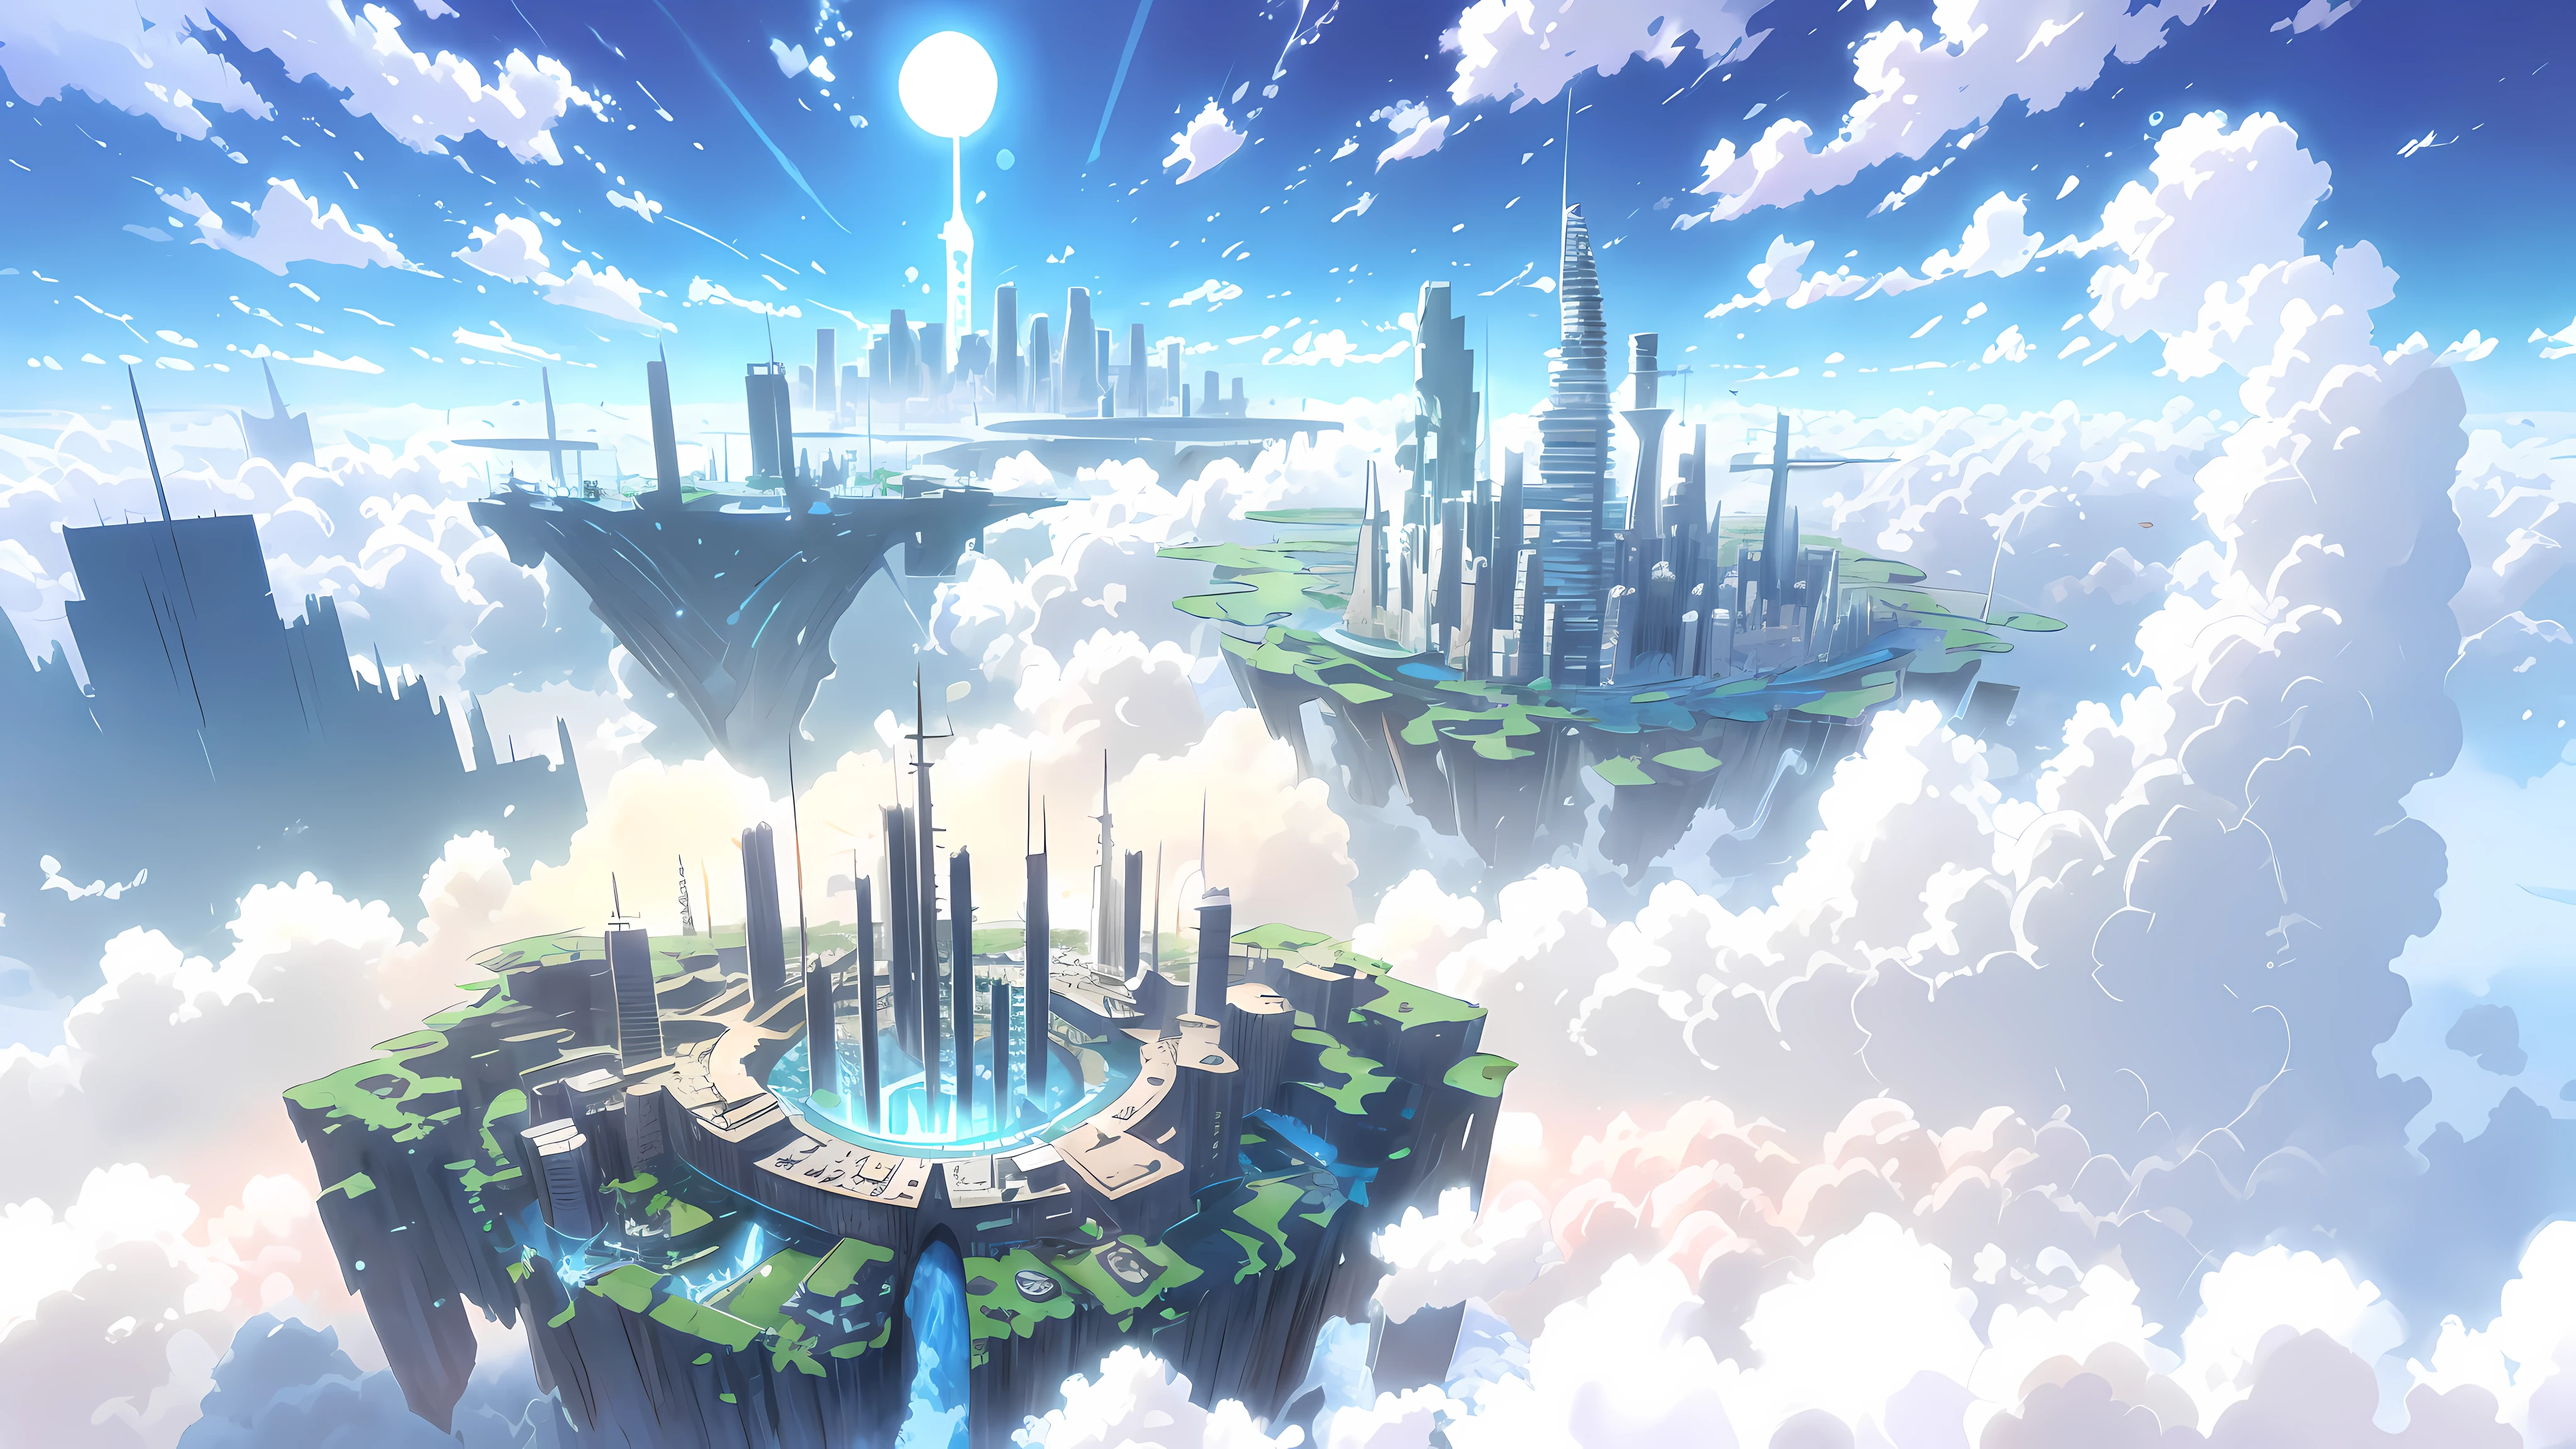 Anime scenes of a city surrounded by clouds and rivers, Anime landscape concept art, Floating city in the sky, Makoto Shinkai!, floating city on clouds, Makoto Shinkai's style, Makoto Shinkai. —h 2160, Makoto Shinkai!!, ( ( Makoto Shinkai ) ), beautiful anime scenery, Shinkai sincerely